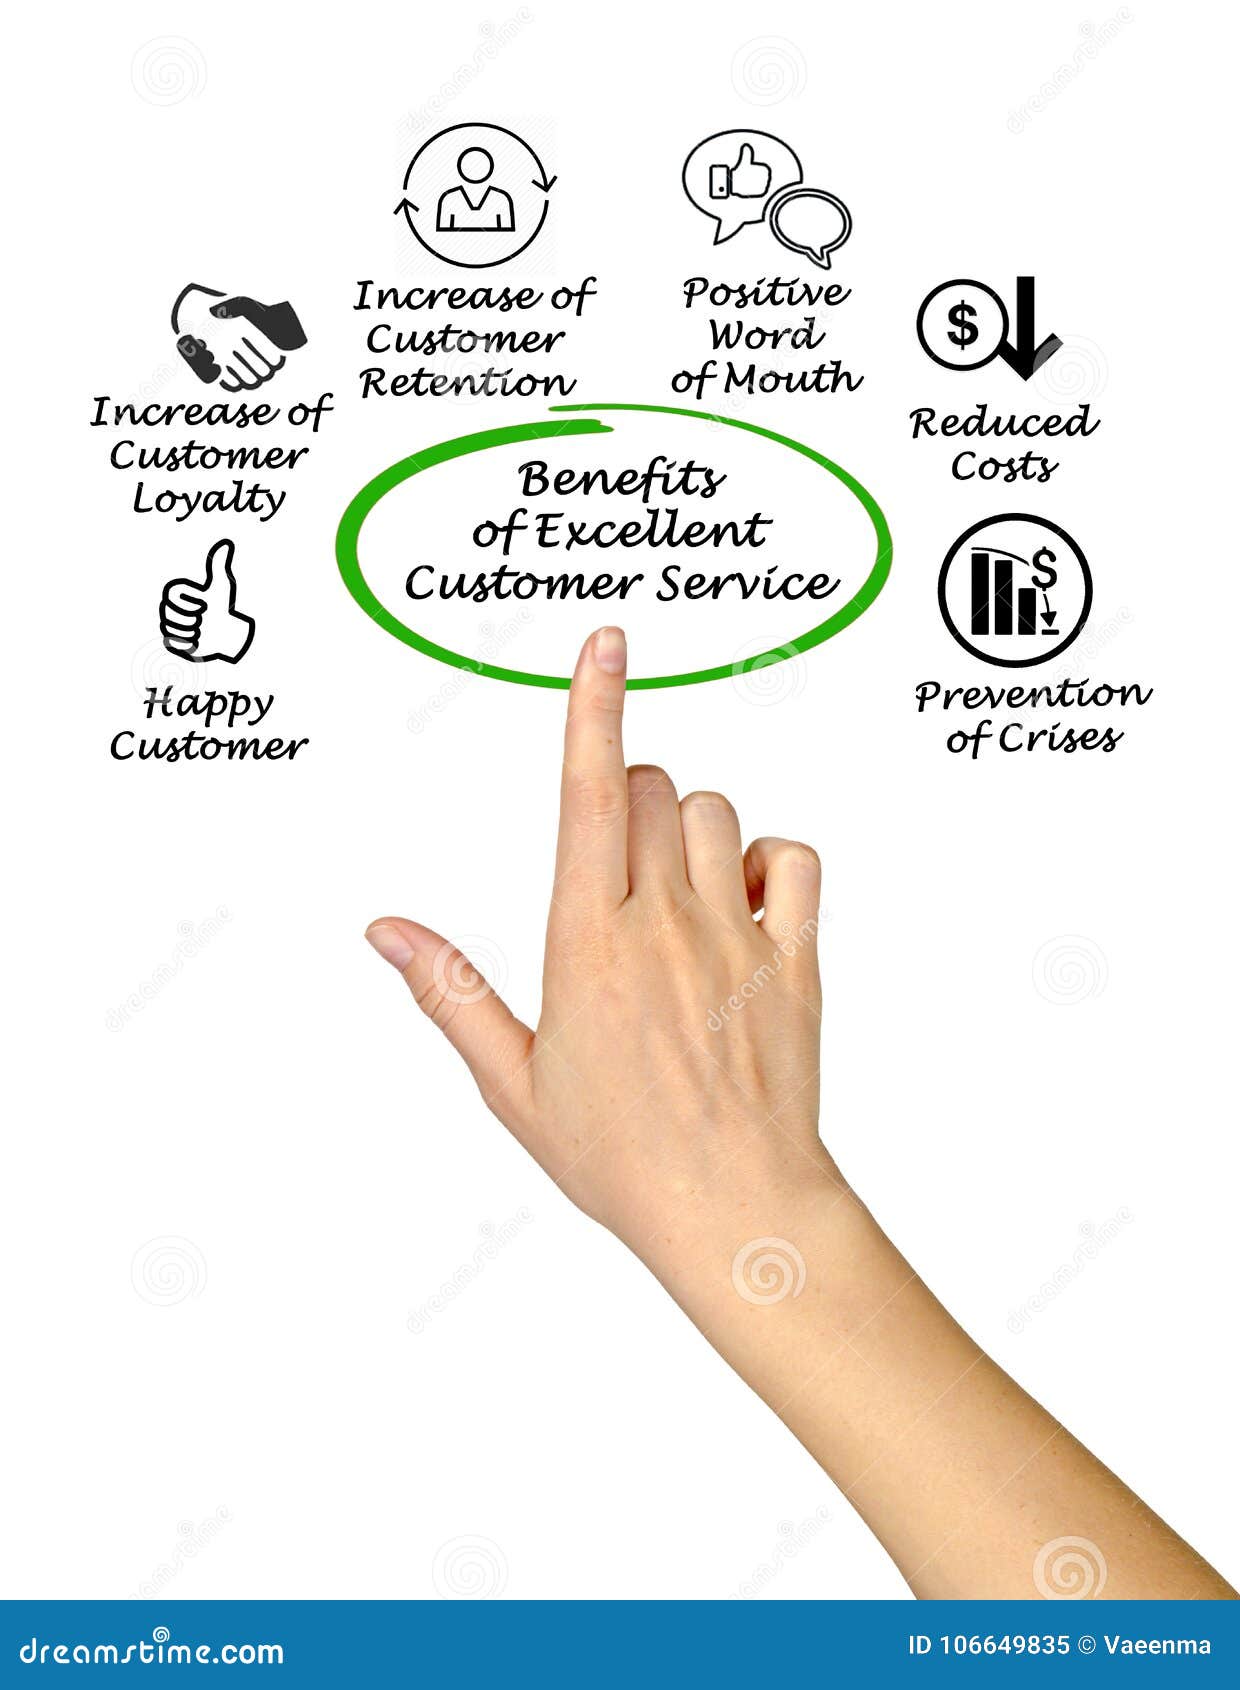 Benefits Of Excellent Customer Service Stock Image Image Of Profit Retention